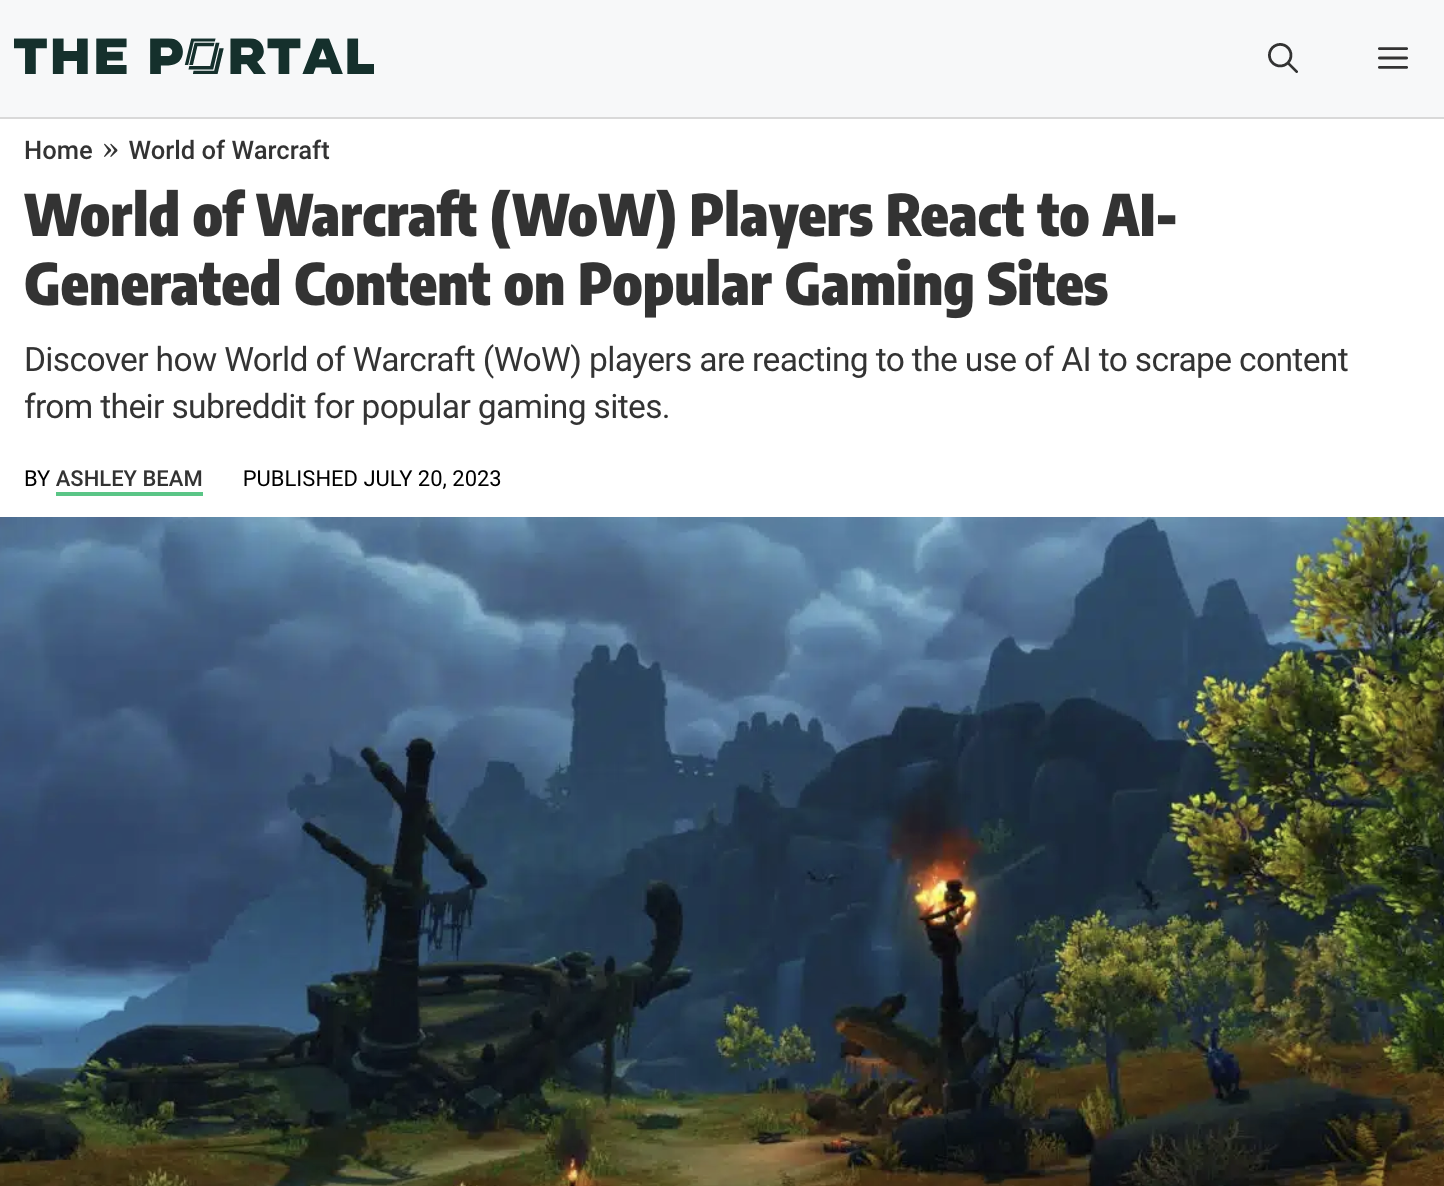 A screenshot of an article from a website called The Portal. The title says, "World of Warcraft (WoW) Players React to AI-Generated Content on Popular Gaming Sites".